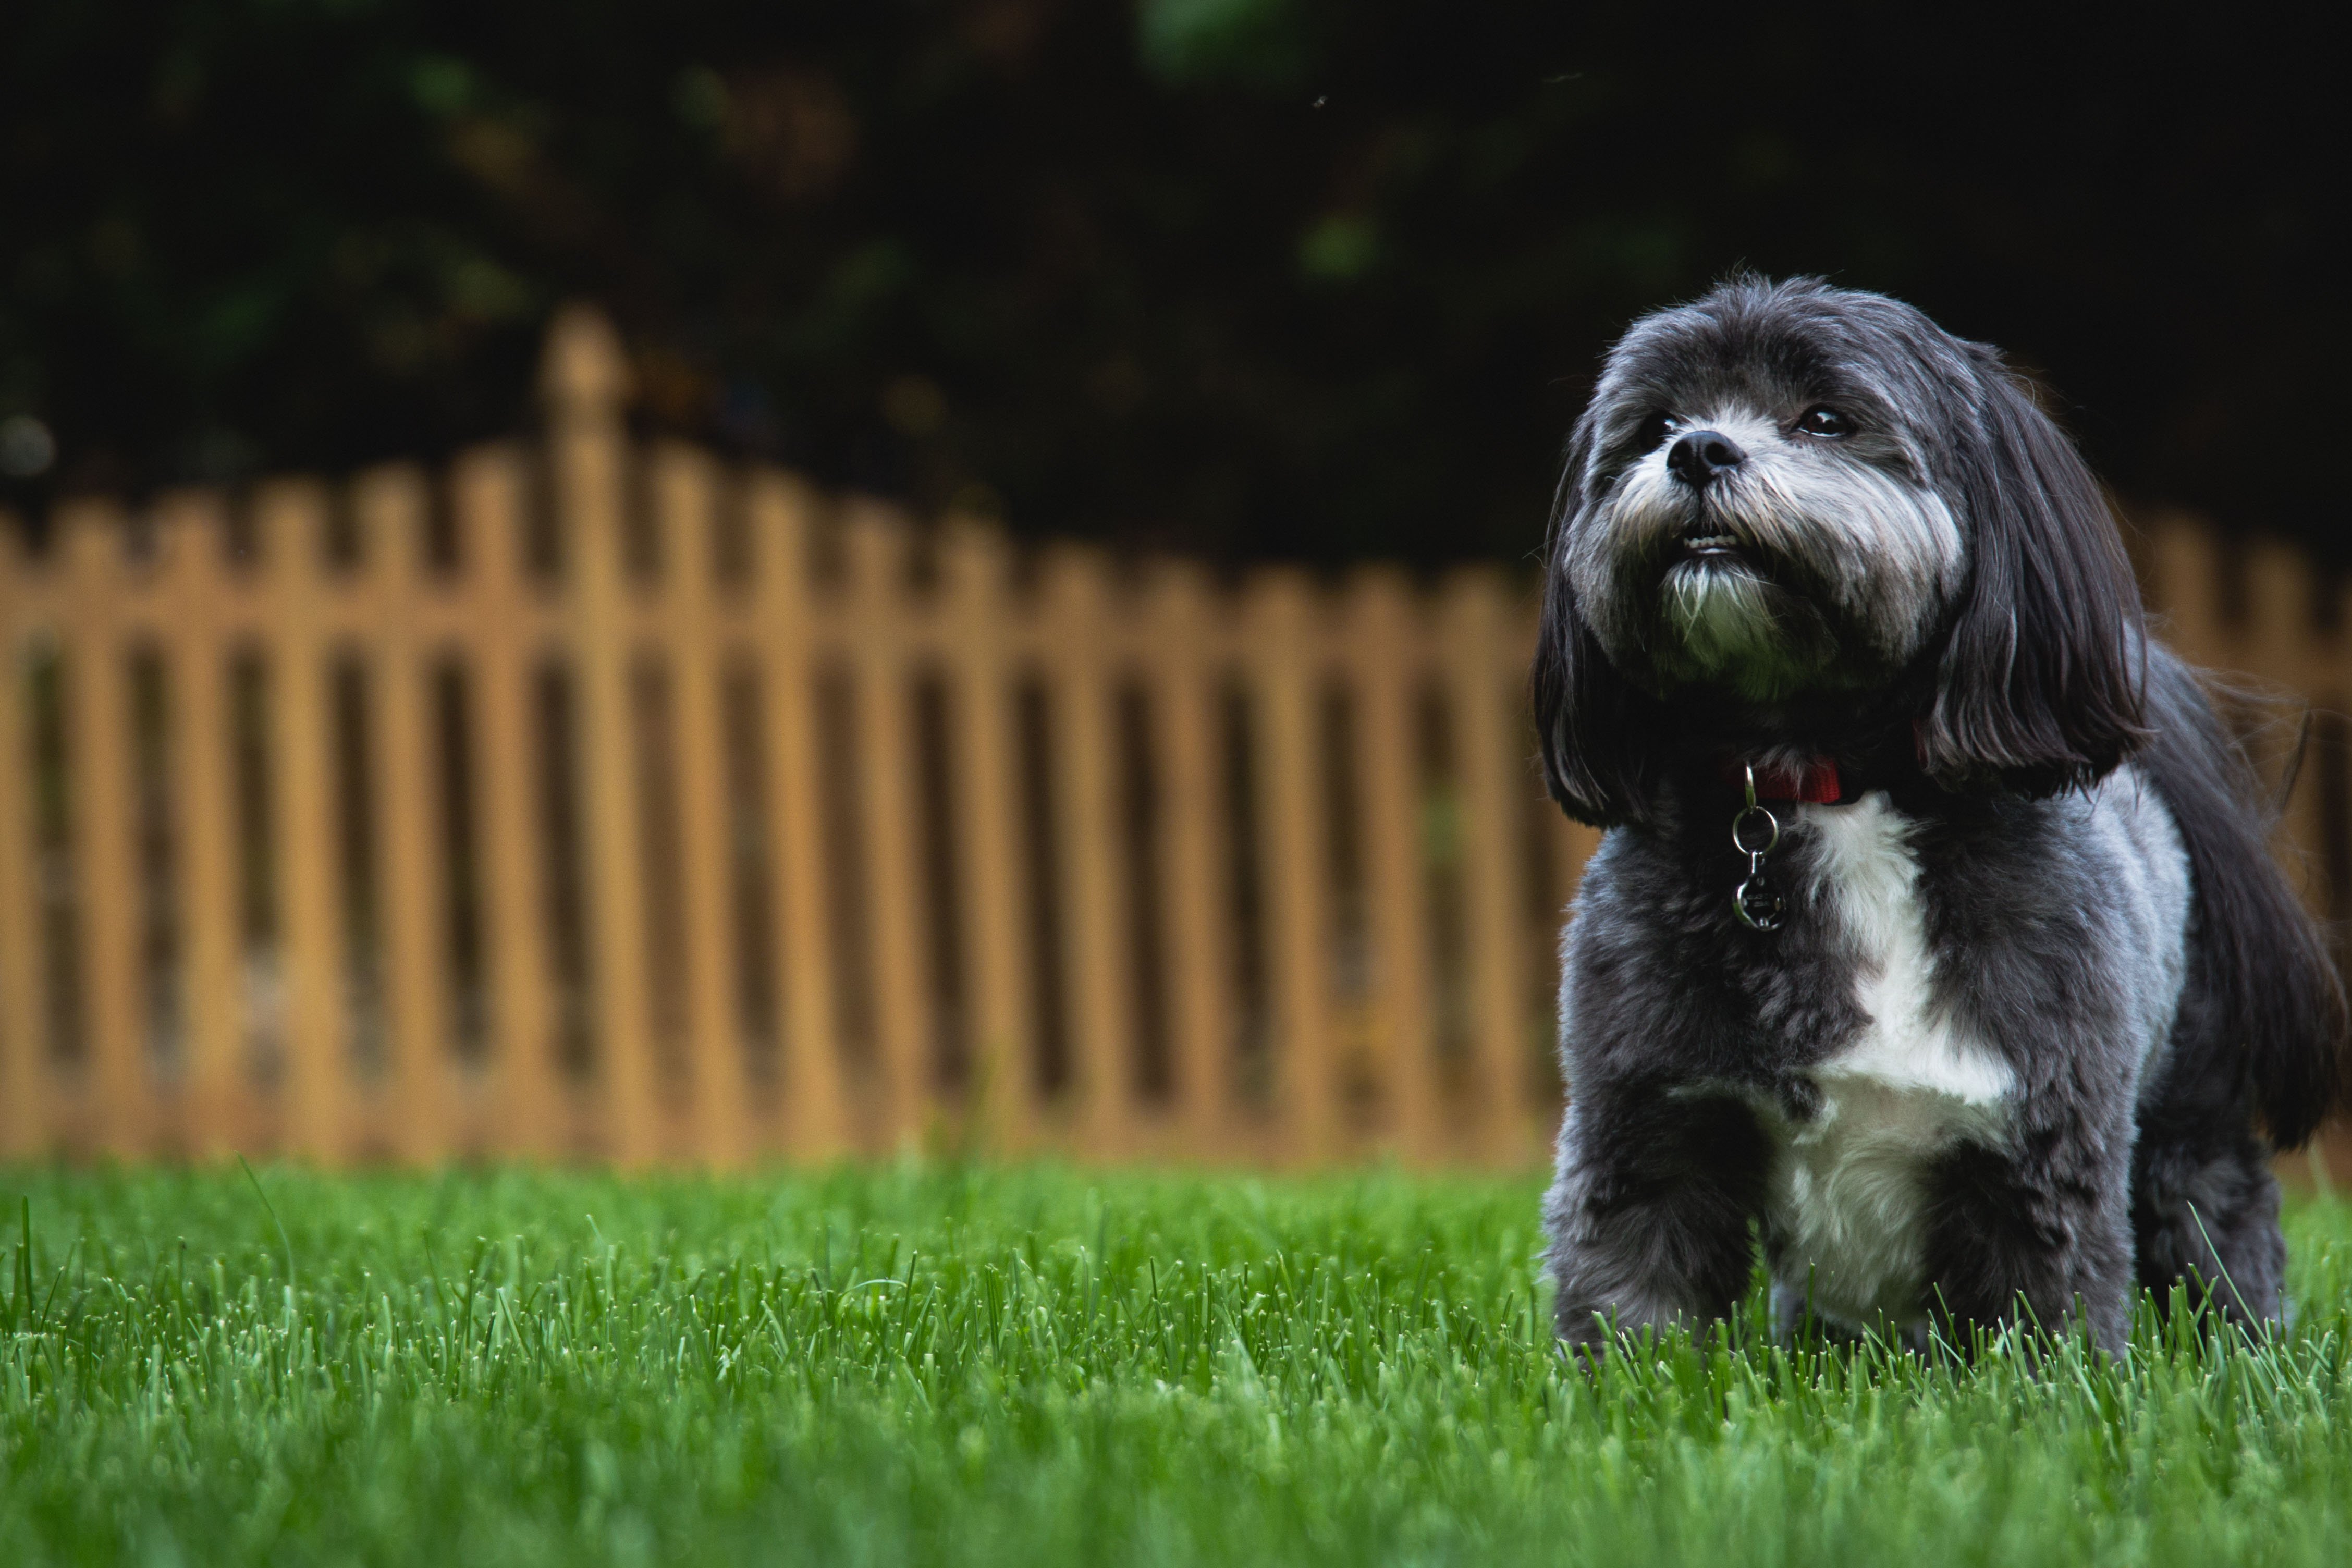 Nutri-Lawn Vancouver are the experts in lawn care in the Lower Mainland.